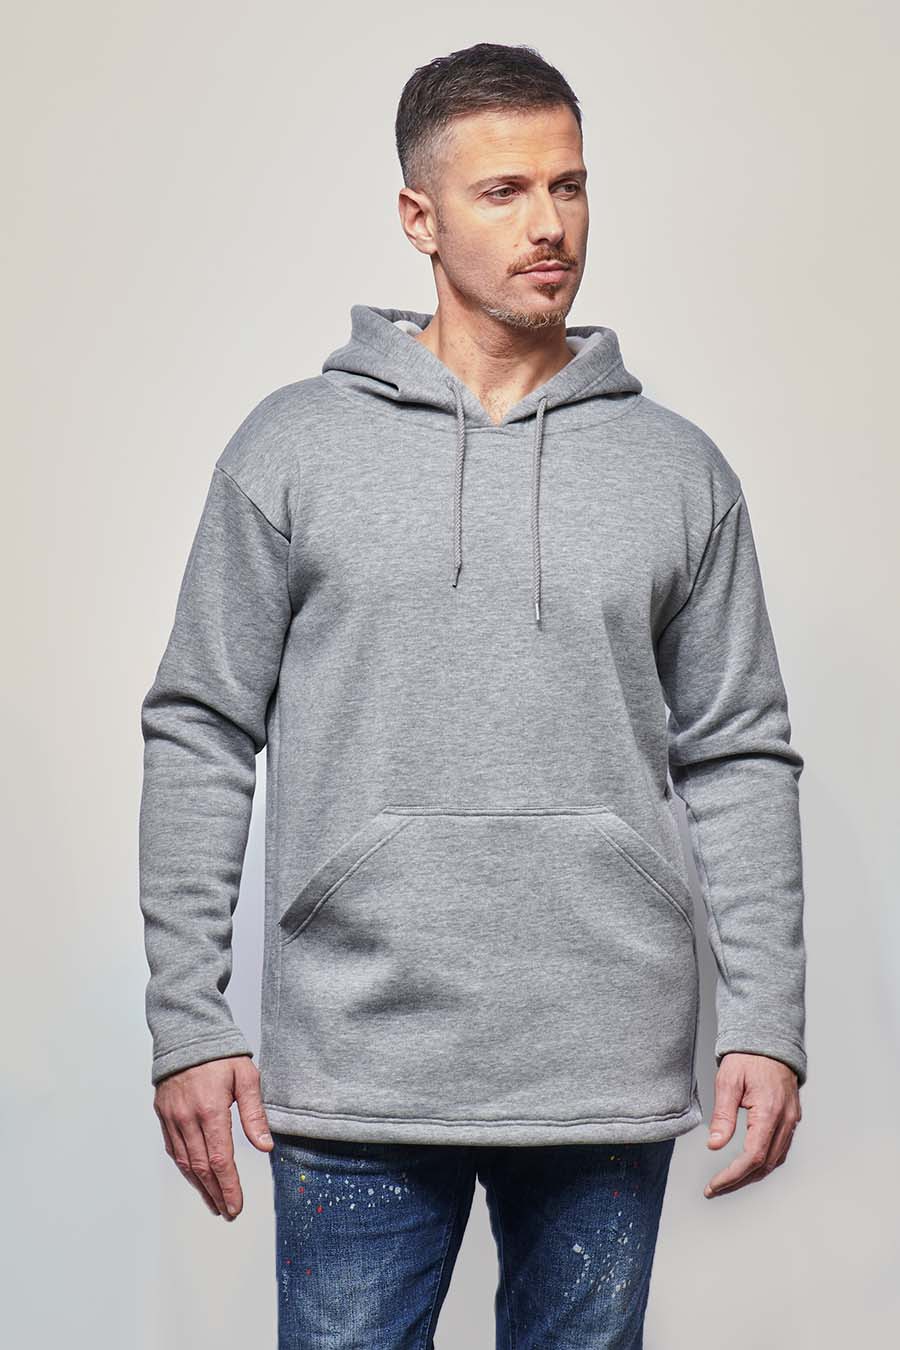 Sweat à capuche hoodie Homme made in France Sam gris-clair - FIL ROUGE